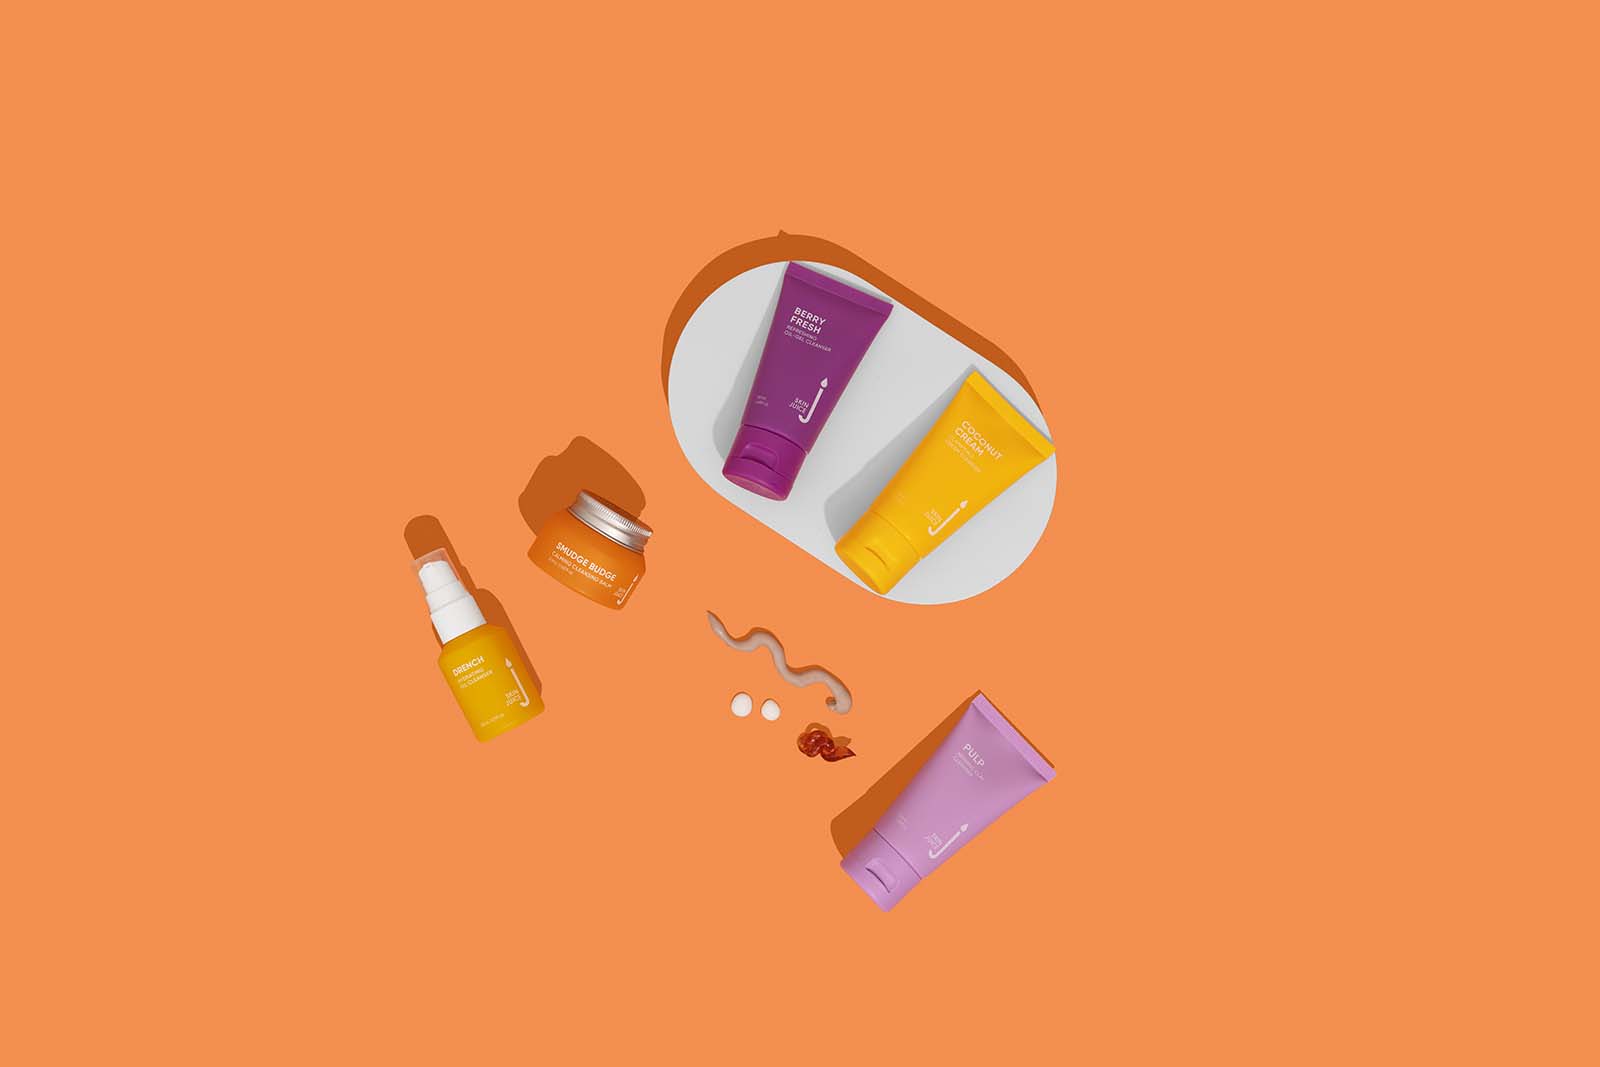 Colourful Skincare Product Photography for a Vibrant Skincare Brand By Colourpop Studio